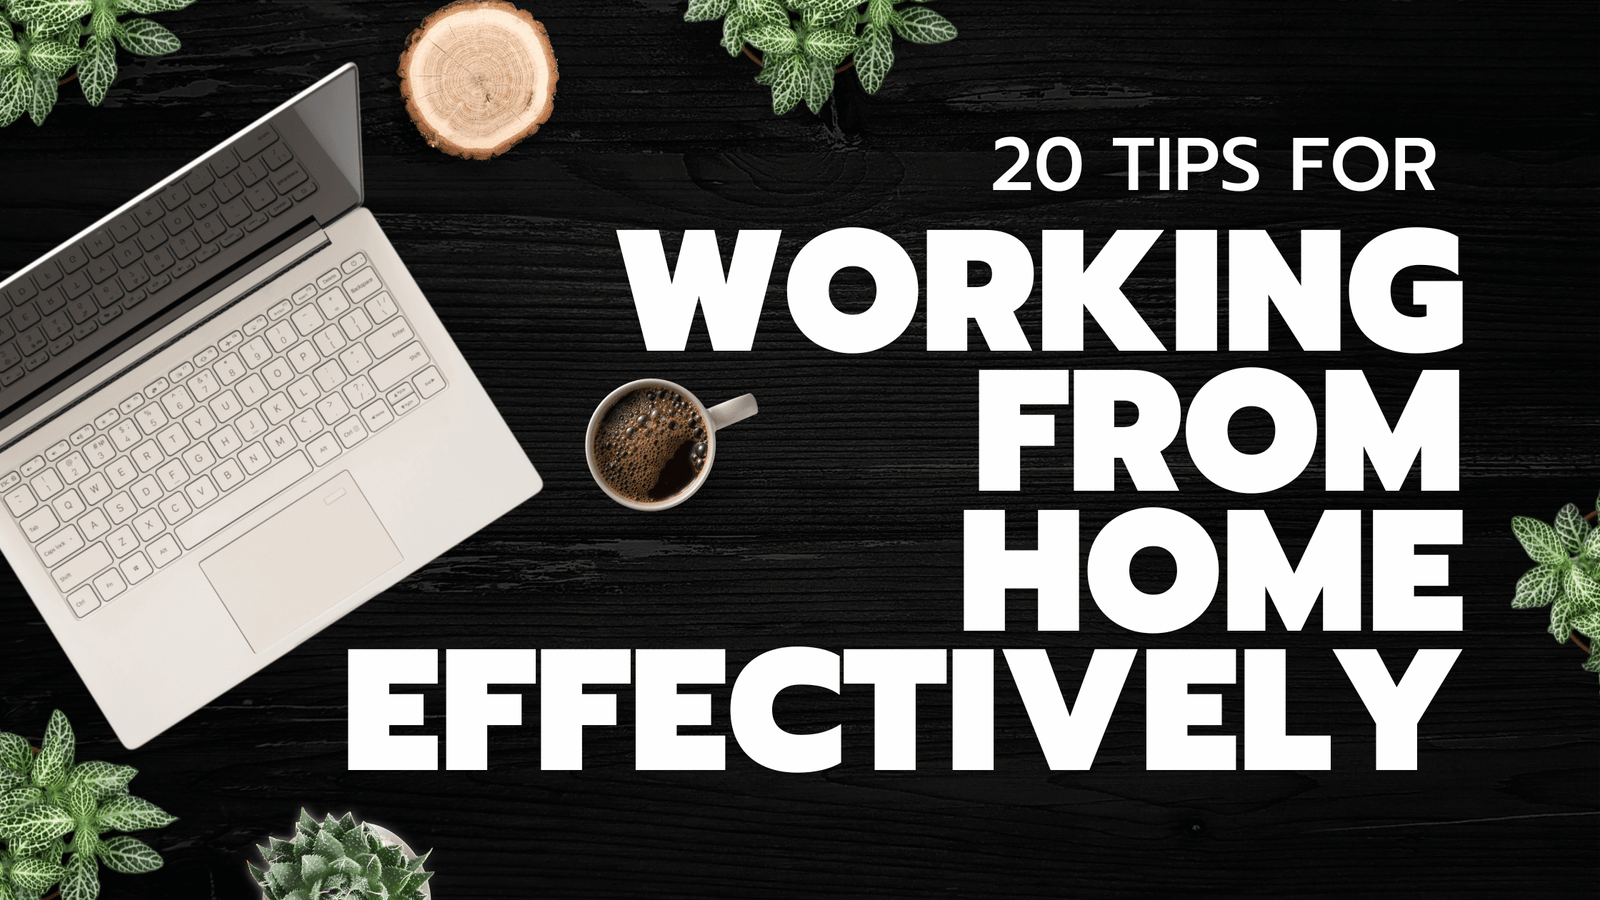 Tips for Working from Home Effectively